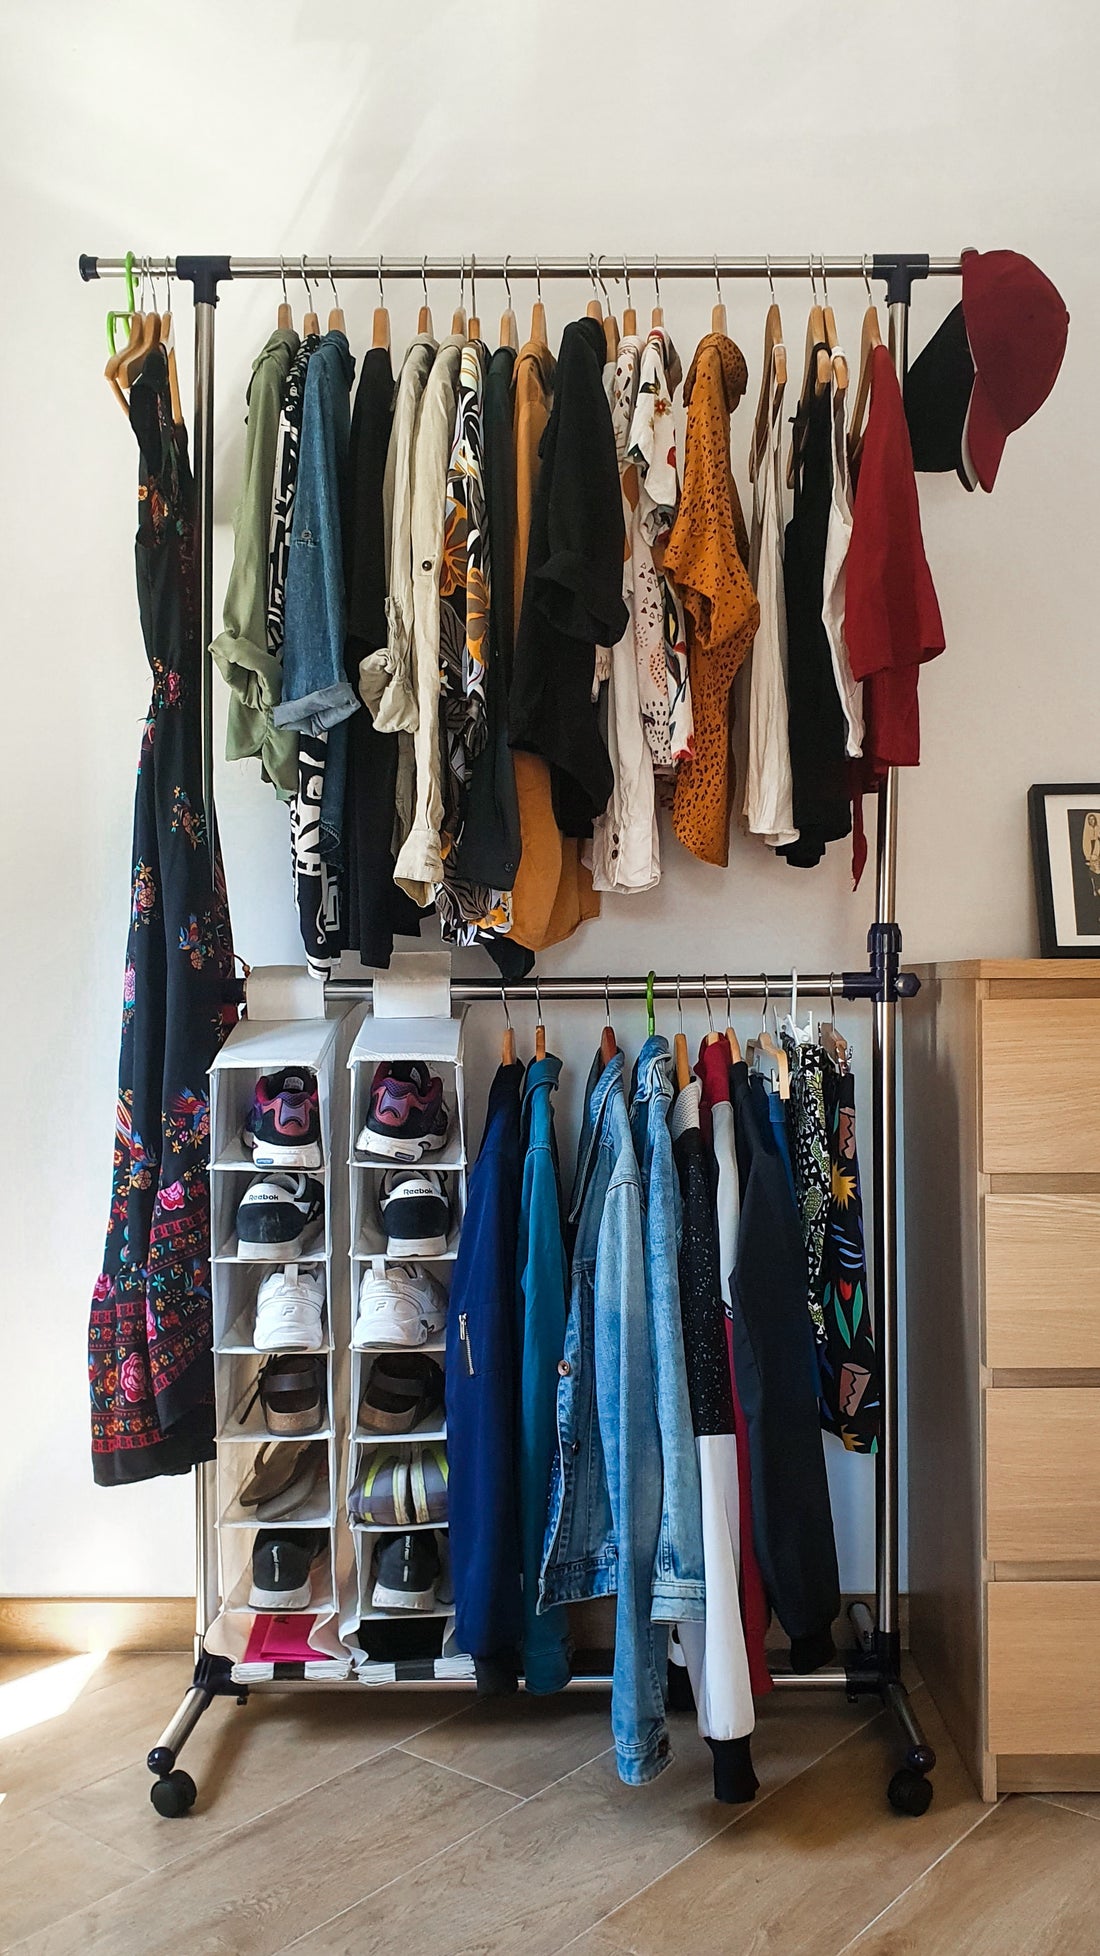 A Global Guide to Upcycling and Recycling Your Closet